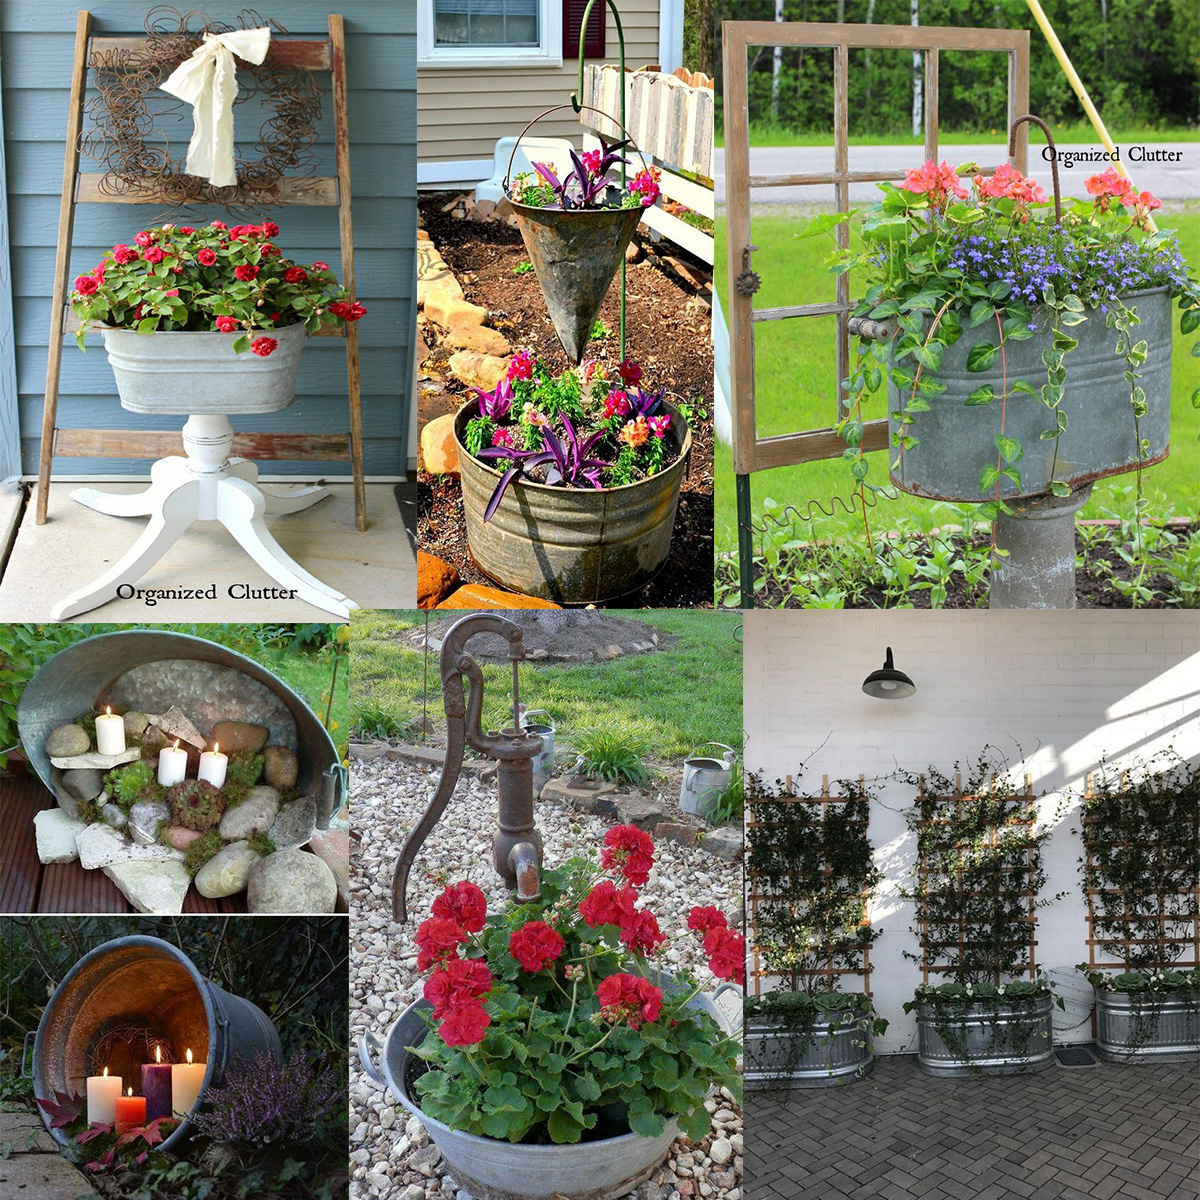 Today we prepare great ideas for you how to use galvanized tubs in your garden